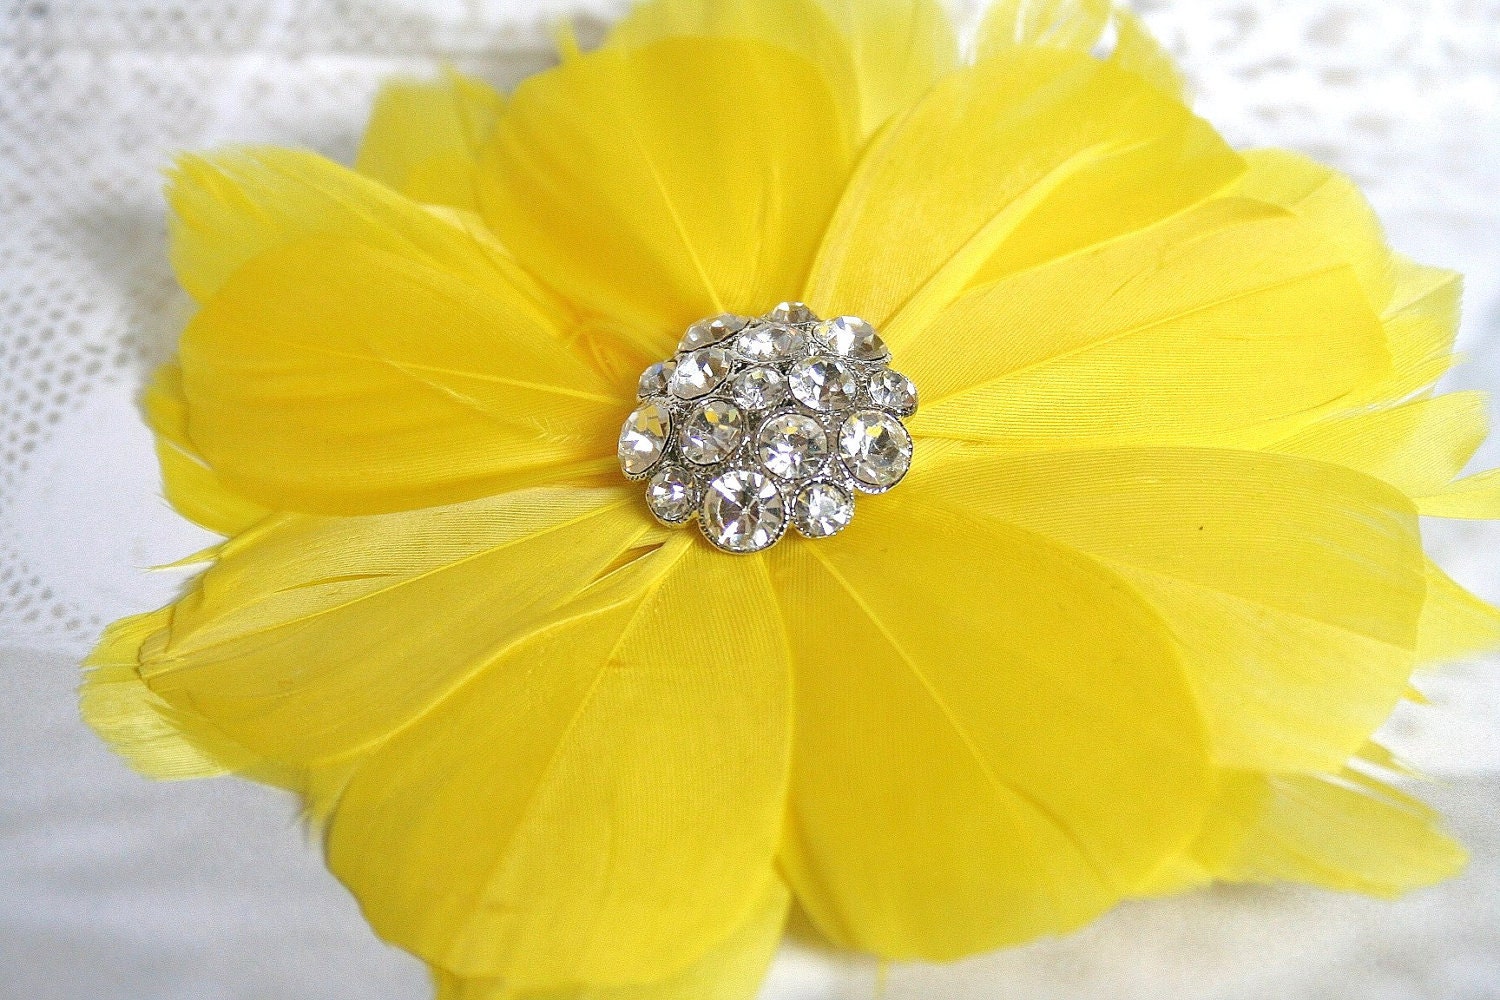 Tags summer yellow hair clip flower hair accessories feathers